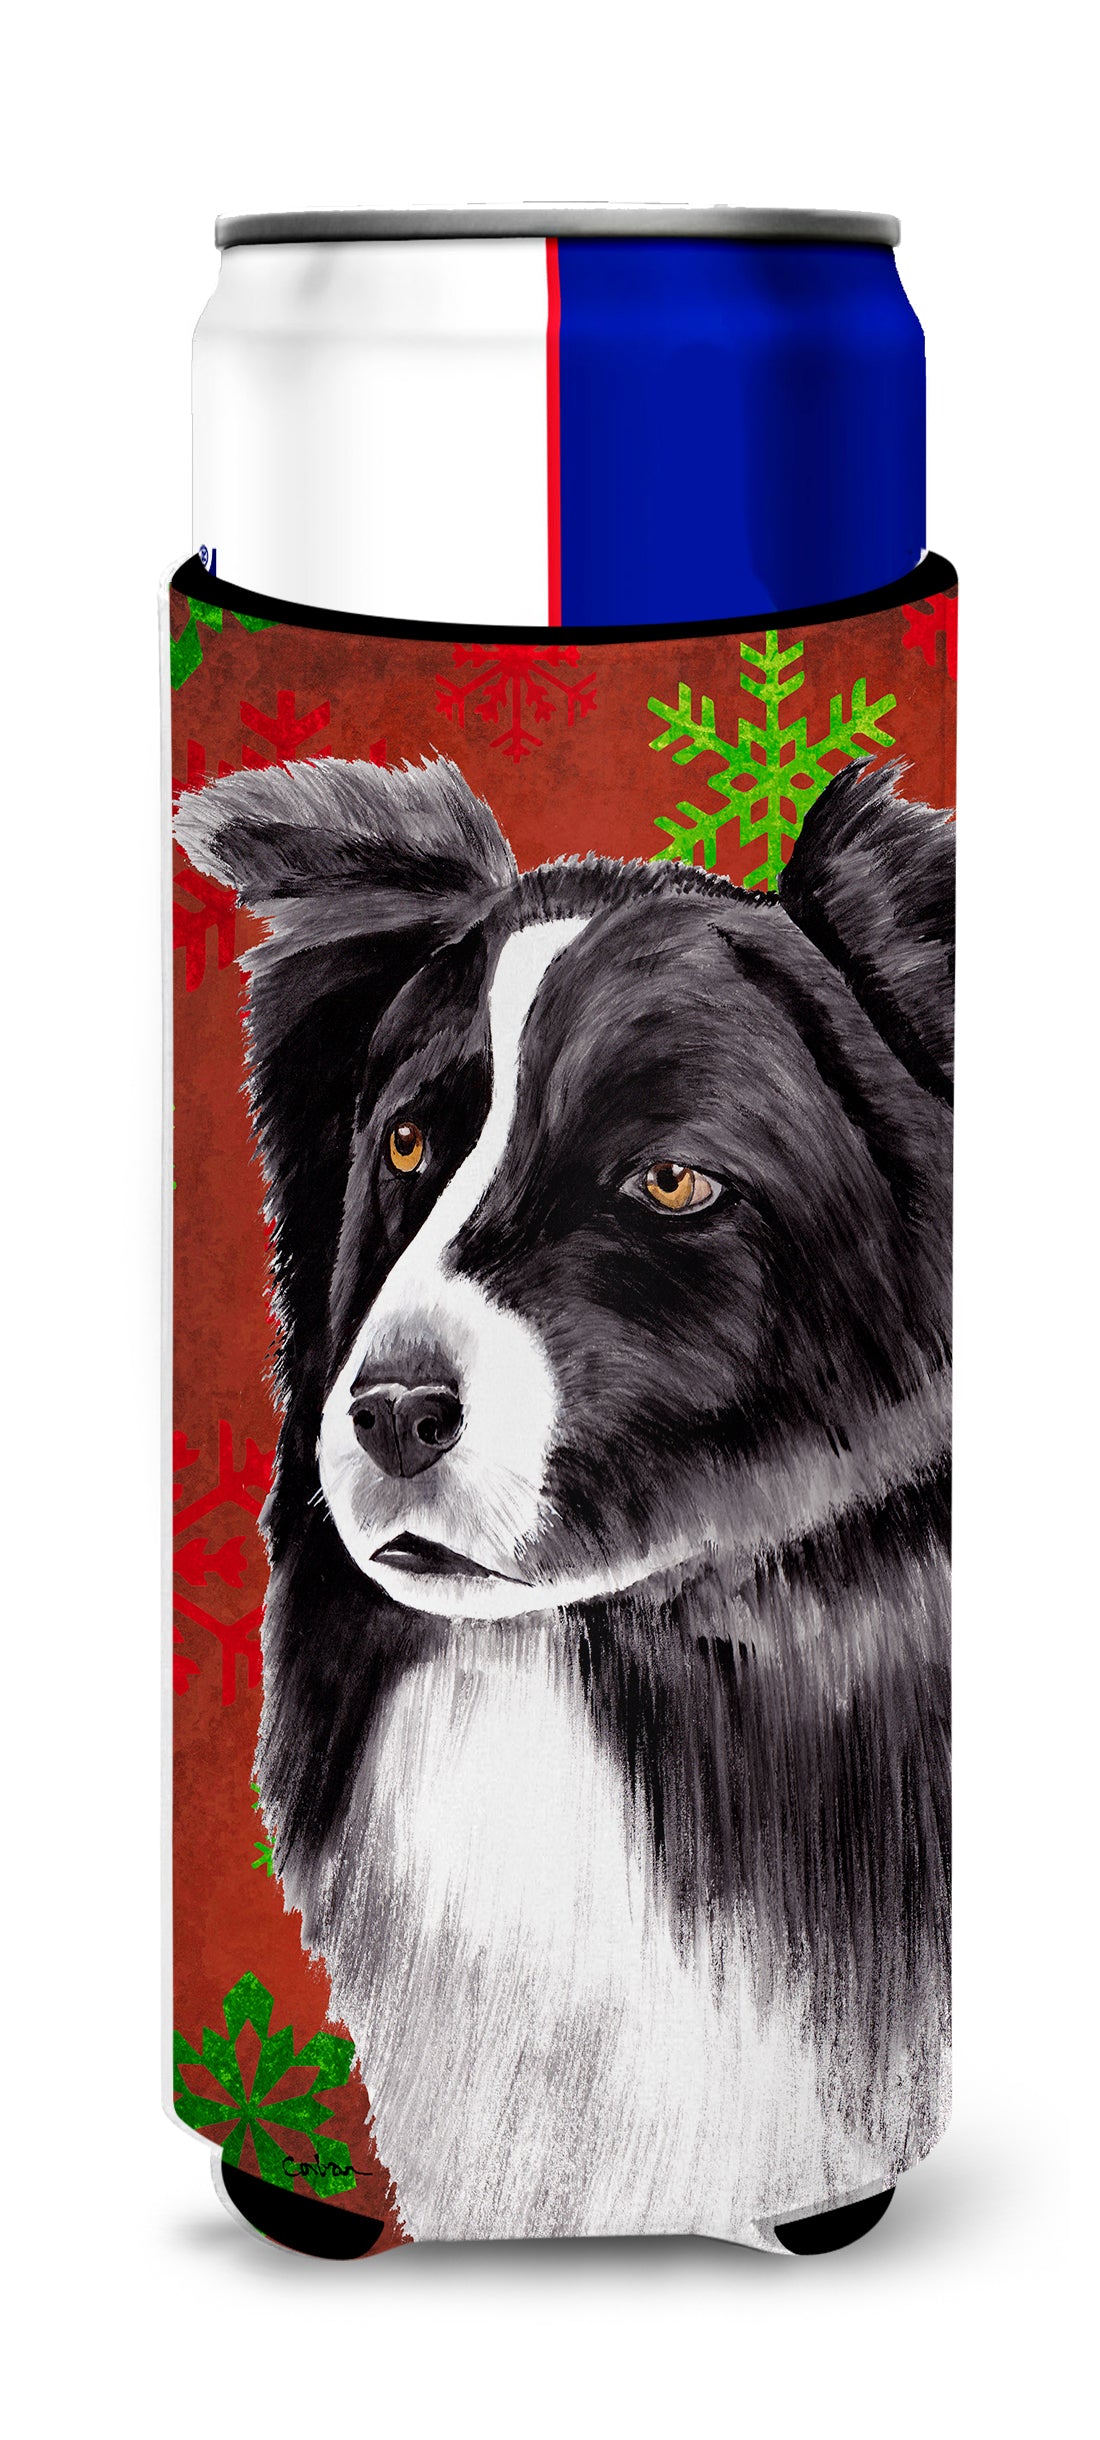 Border Collie Red and Green Snowflakes Holiday Christmas Ultra Beverage Insulators for slim cans SC9407MUK.